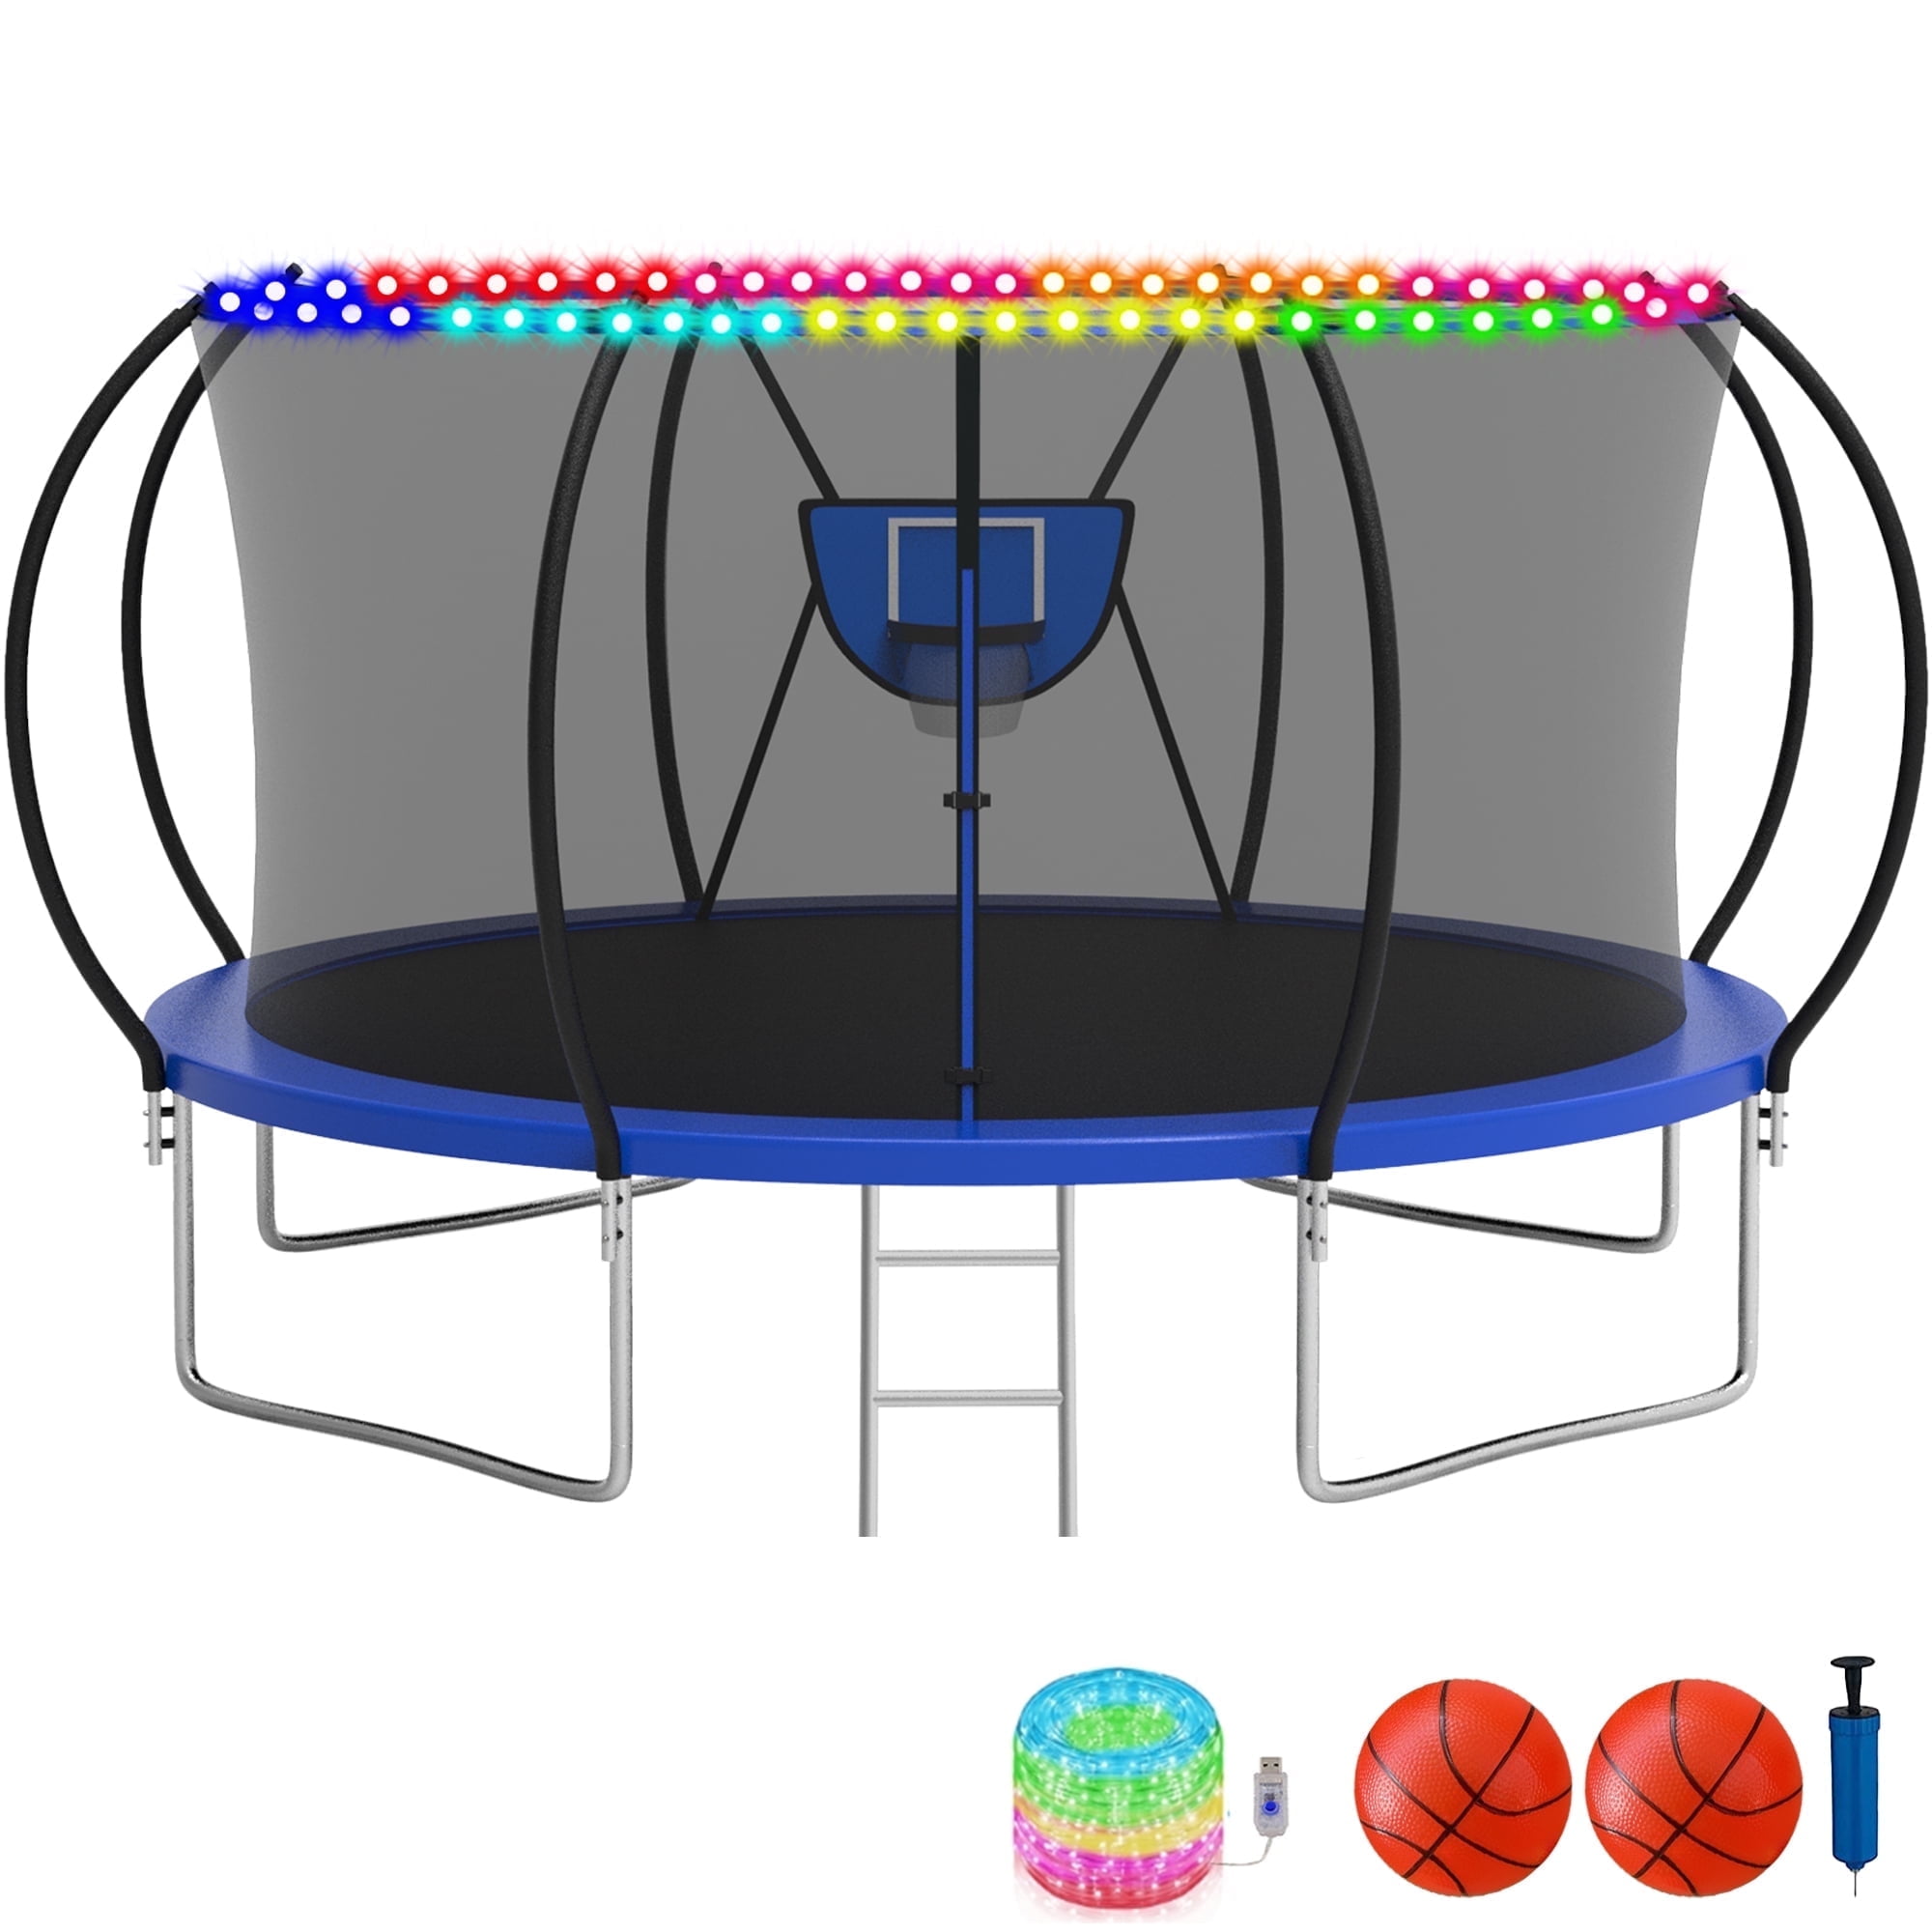 KOFUN Trampoline with Basketball Hoop & Light, 1500lbs 10FT 12FT 14FT 16FT Trampoline for Adults and Kids, No Gap Design Backyard Trampoline with Enclosure Net, Ladder, Blue